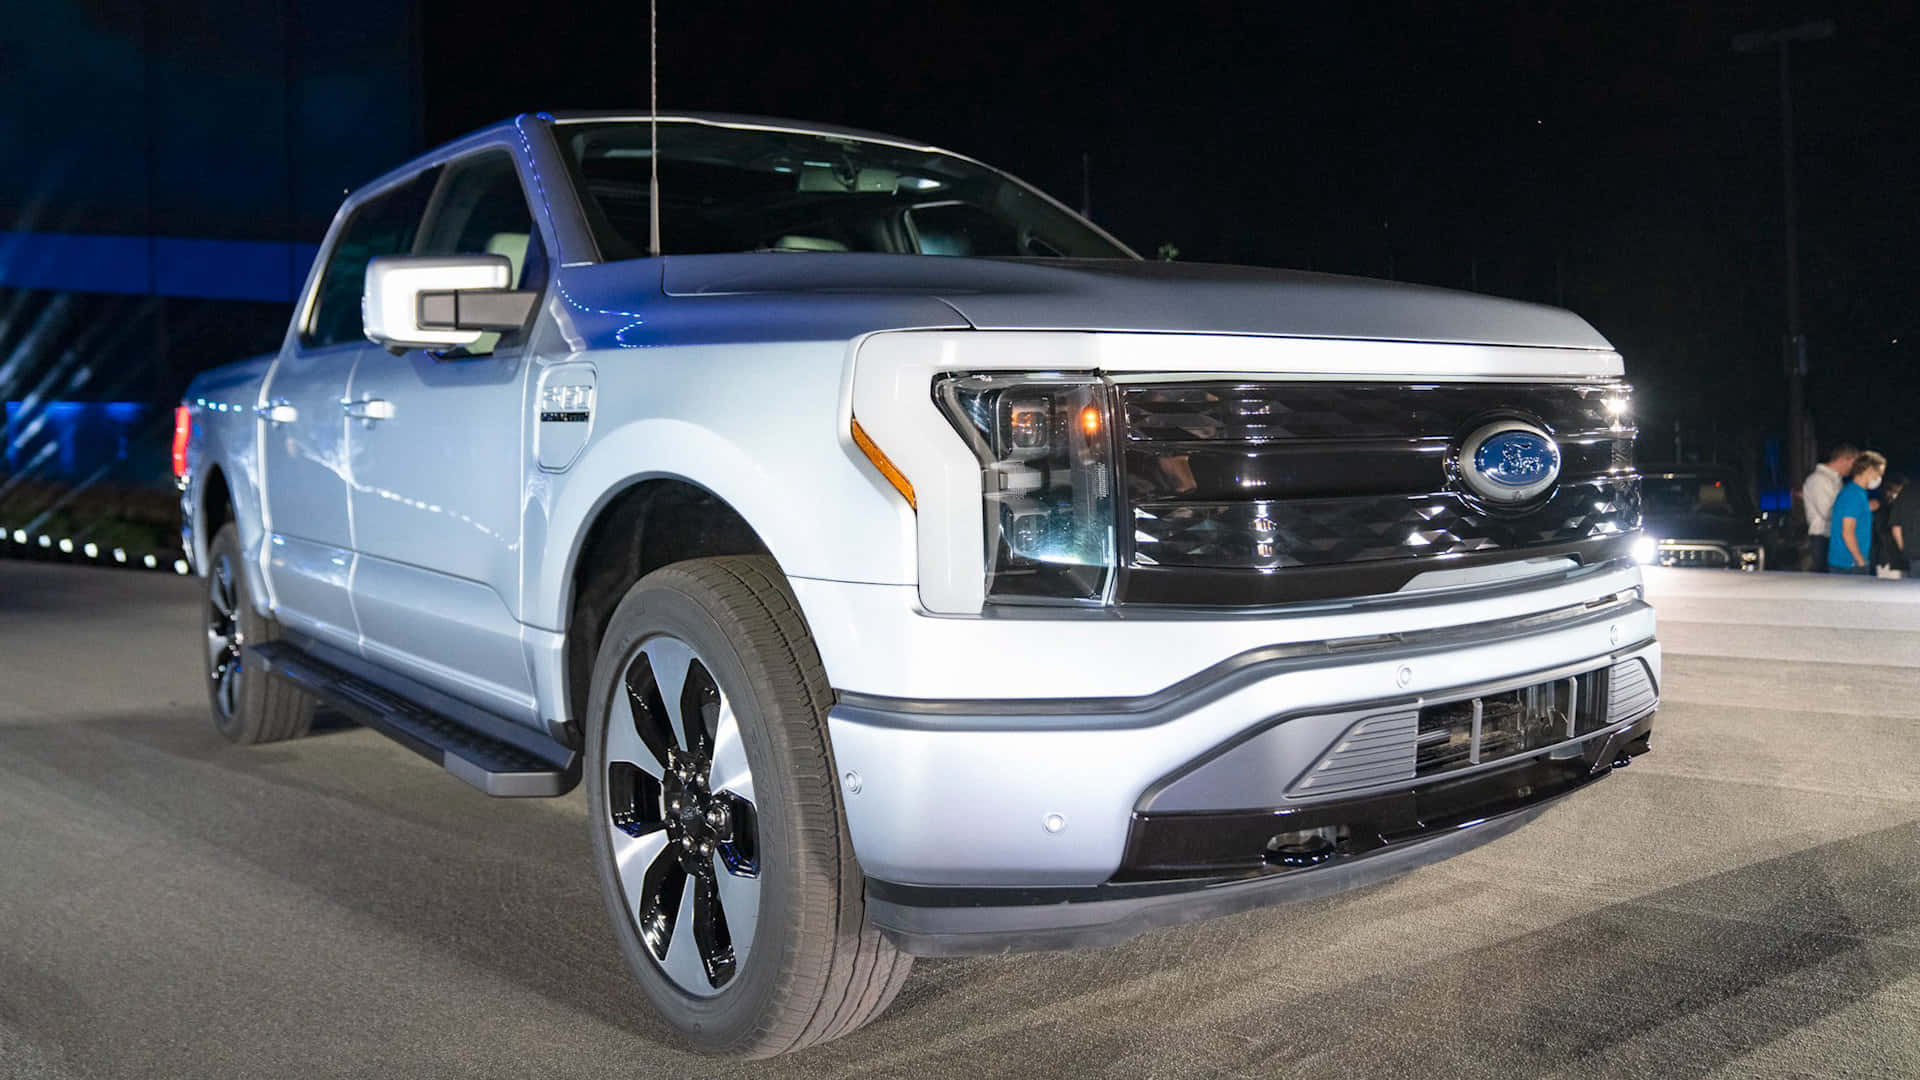 Ford tries to outperform the competition with it's powerful trucks